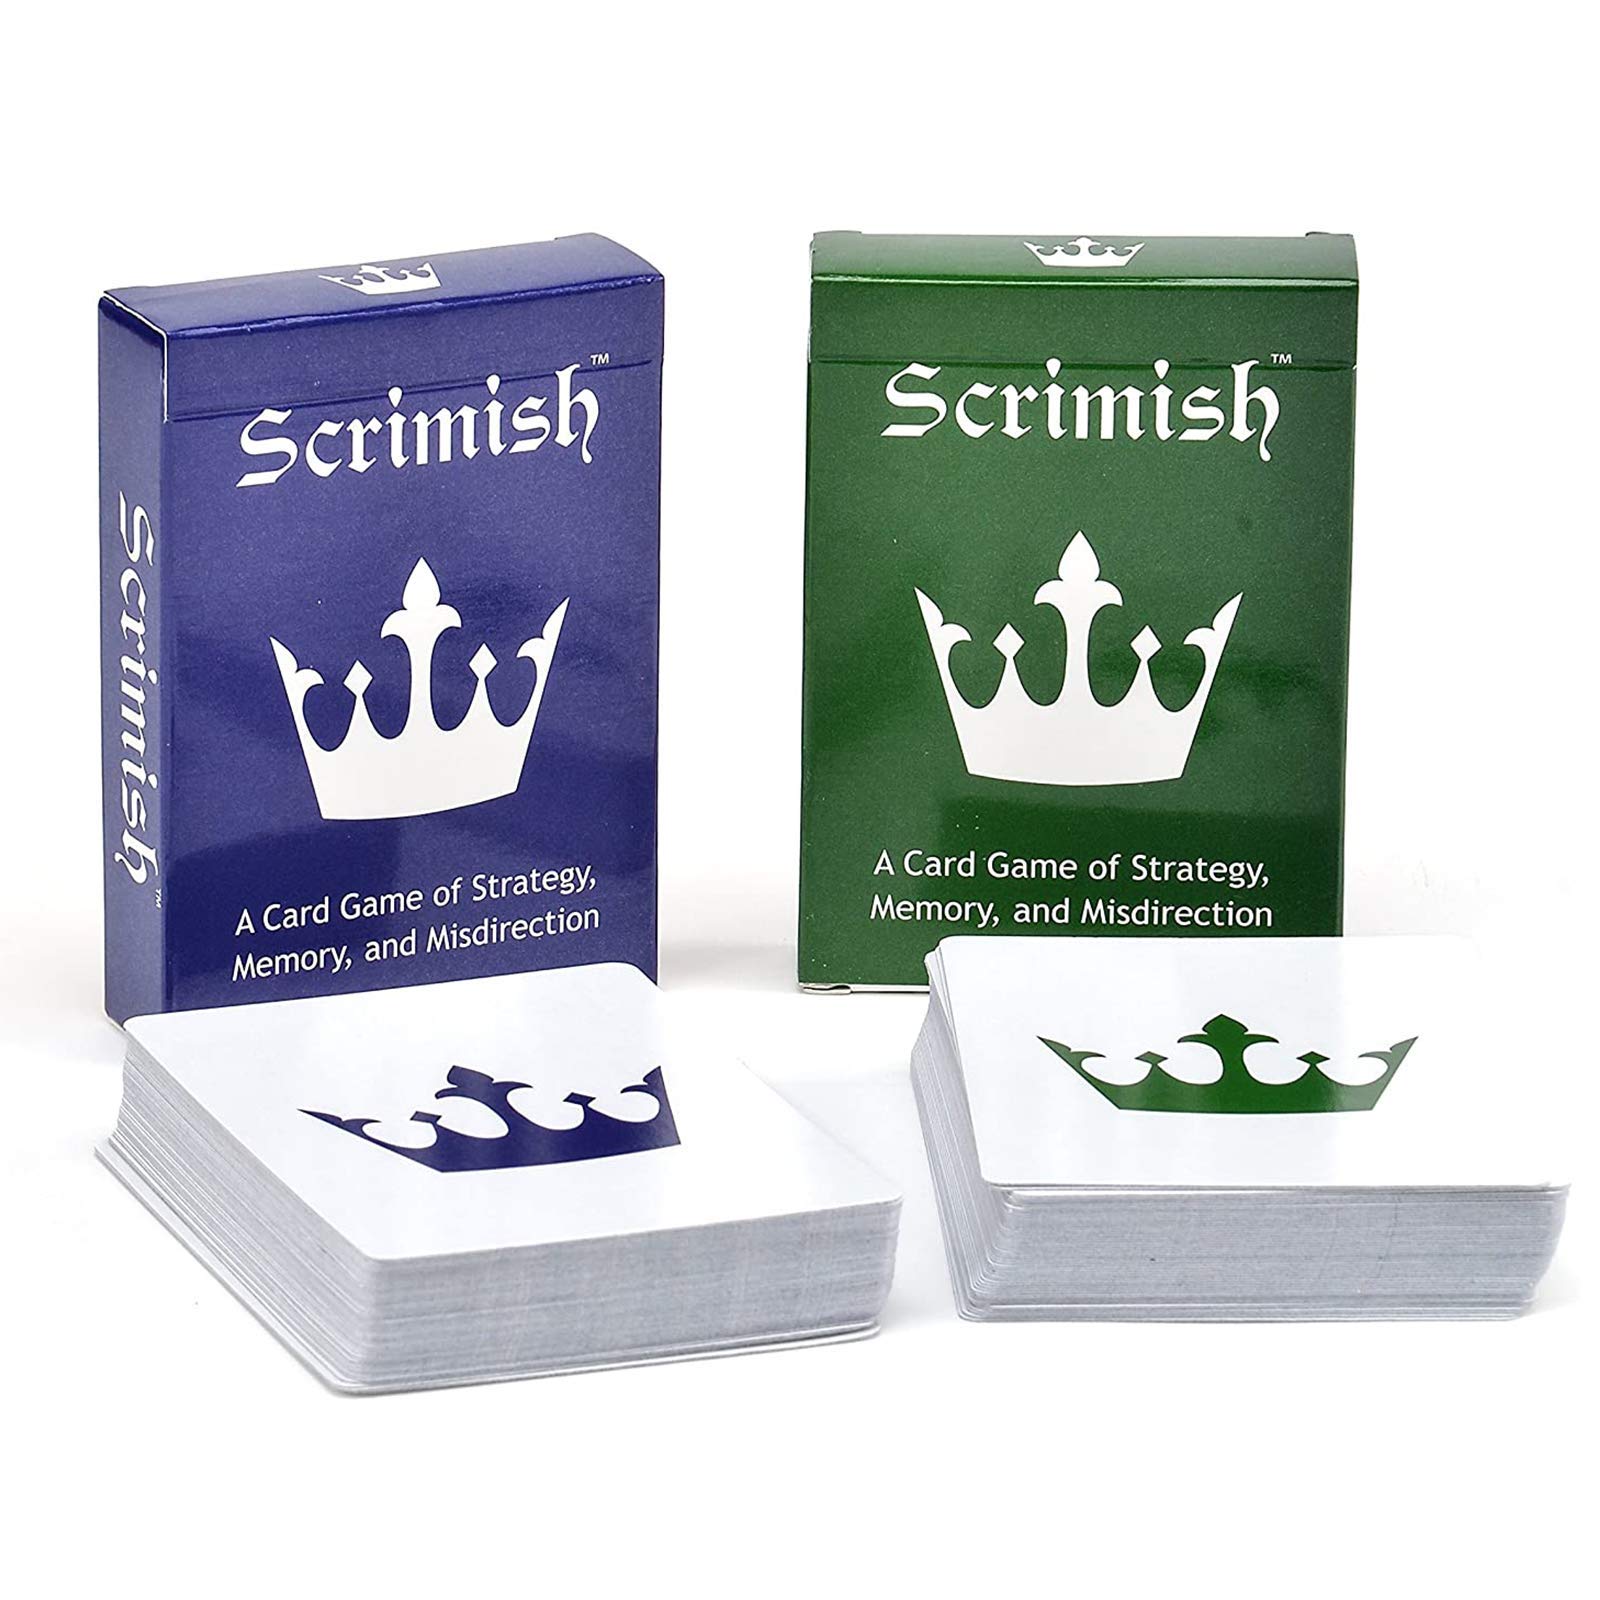 Nexci Scrimish Card Game - 2 Pack Strategy Games for Up to 4 Players Including Adults, Teens, Kids and Families That is Easy to Learn and Fun to Play